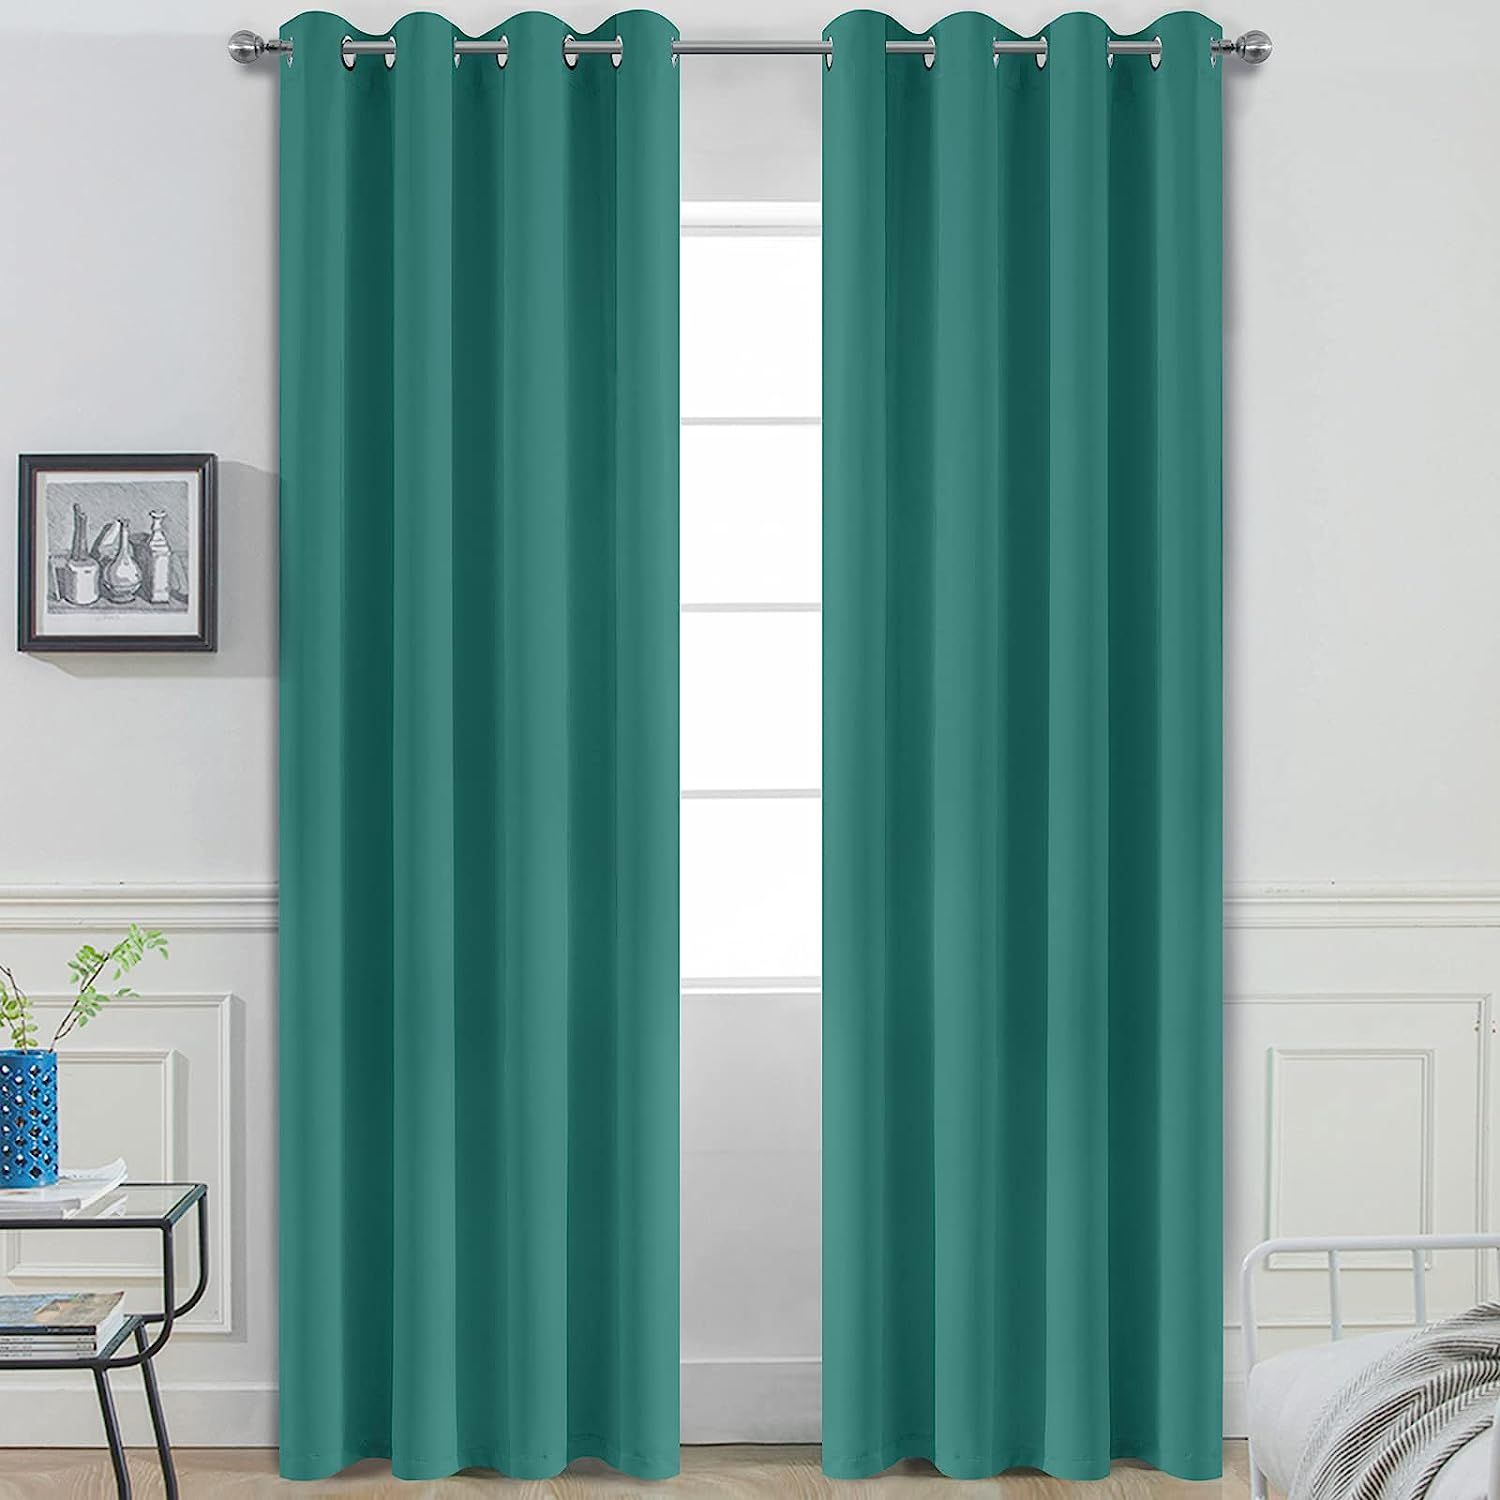 Yakamok Light Blocking Thermal Insulated Teal Blackout Curtains Solid Grommet Top Window Drapes B... | Amazon (US)